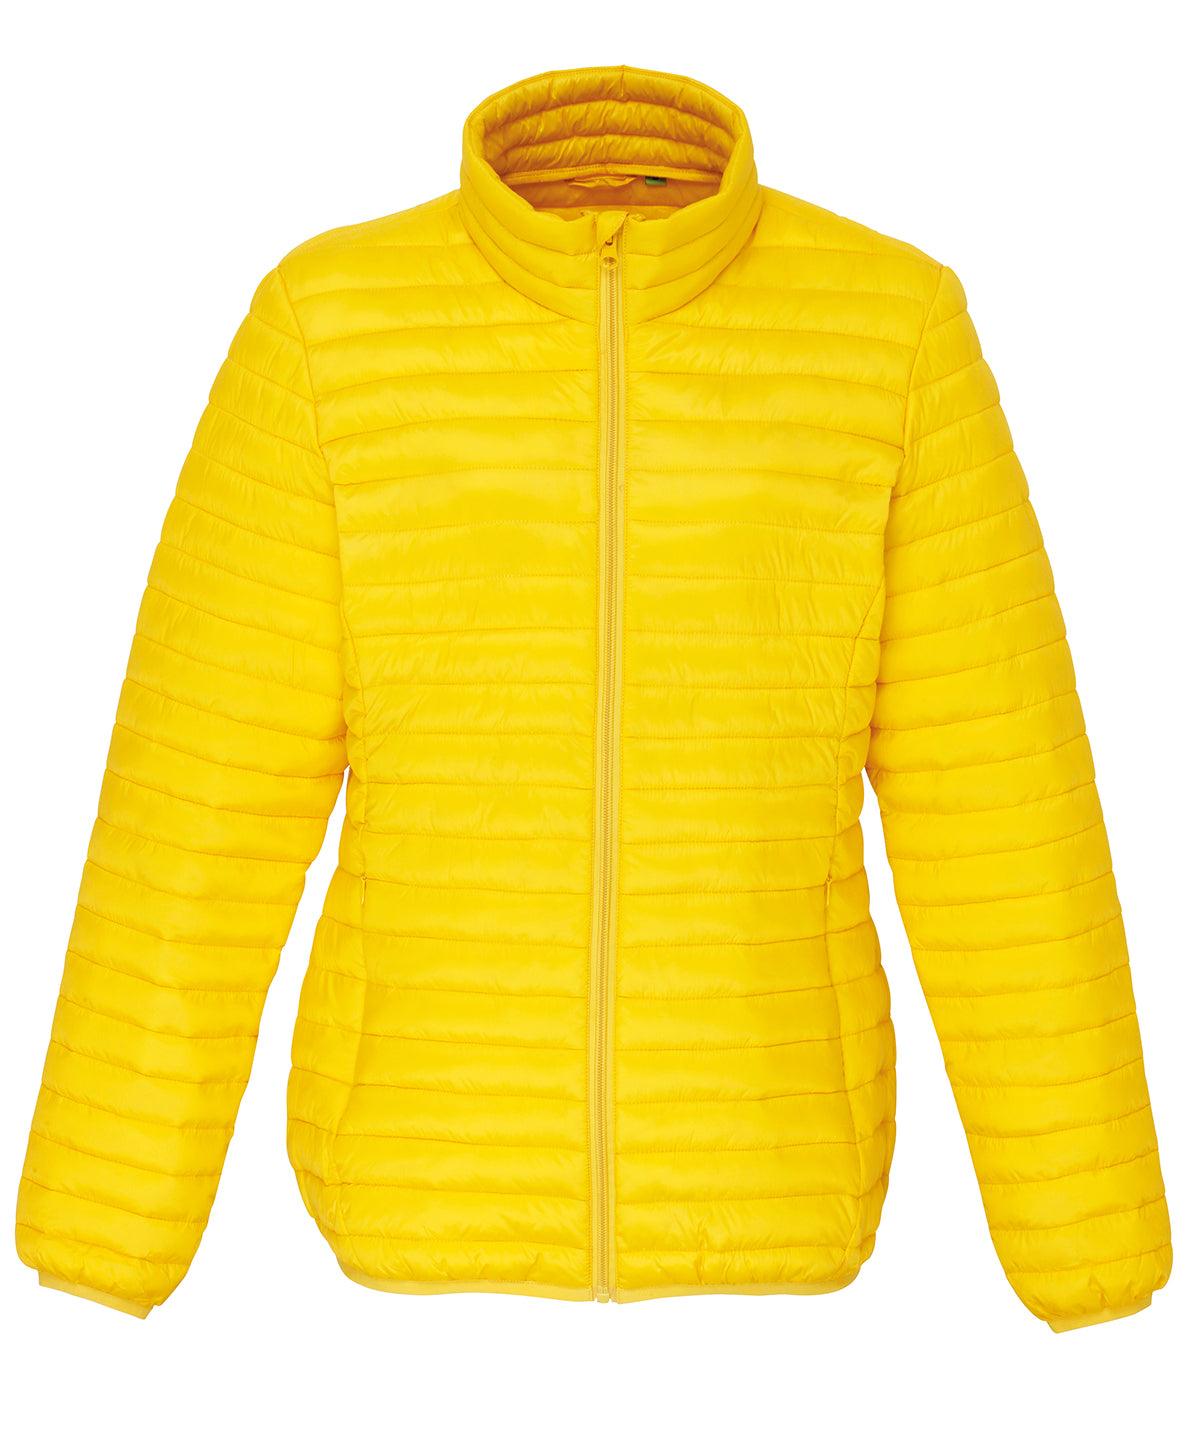 Bright Yellow - Women's tribe fineline padded jacket Jackets 2786 Alfresco Dining, Jackets & Coats, Must Haves, Padded & Insulation, Padded Perfection, Rebrandable, Women's Fashion Schoolwear Centres